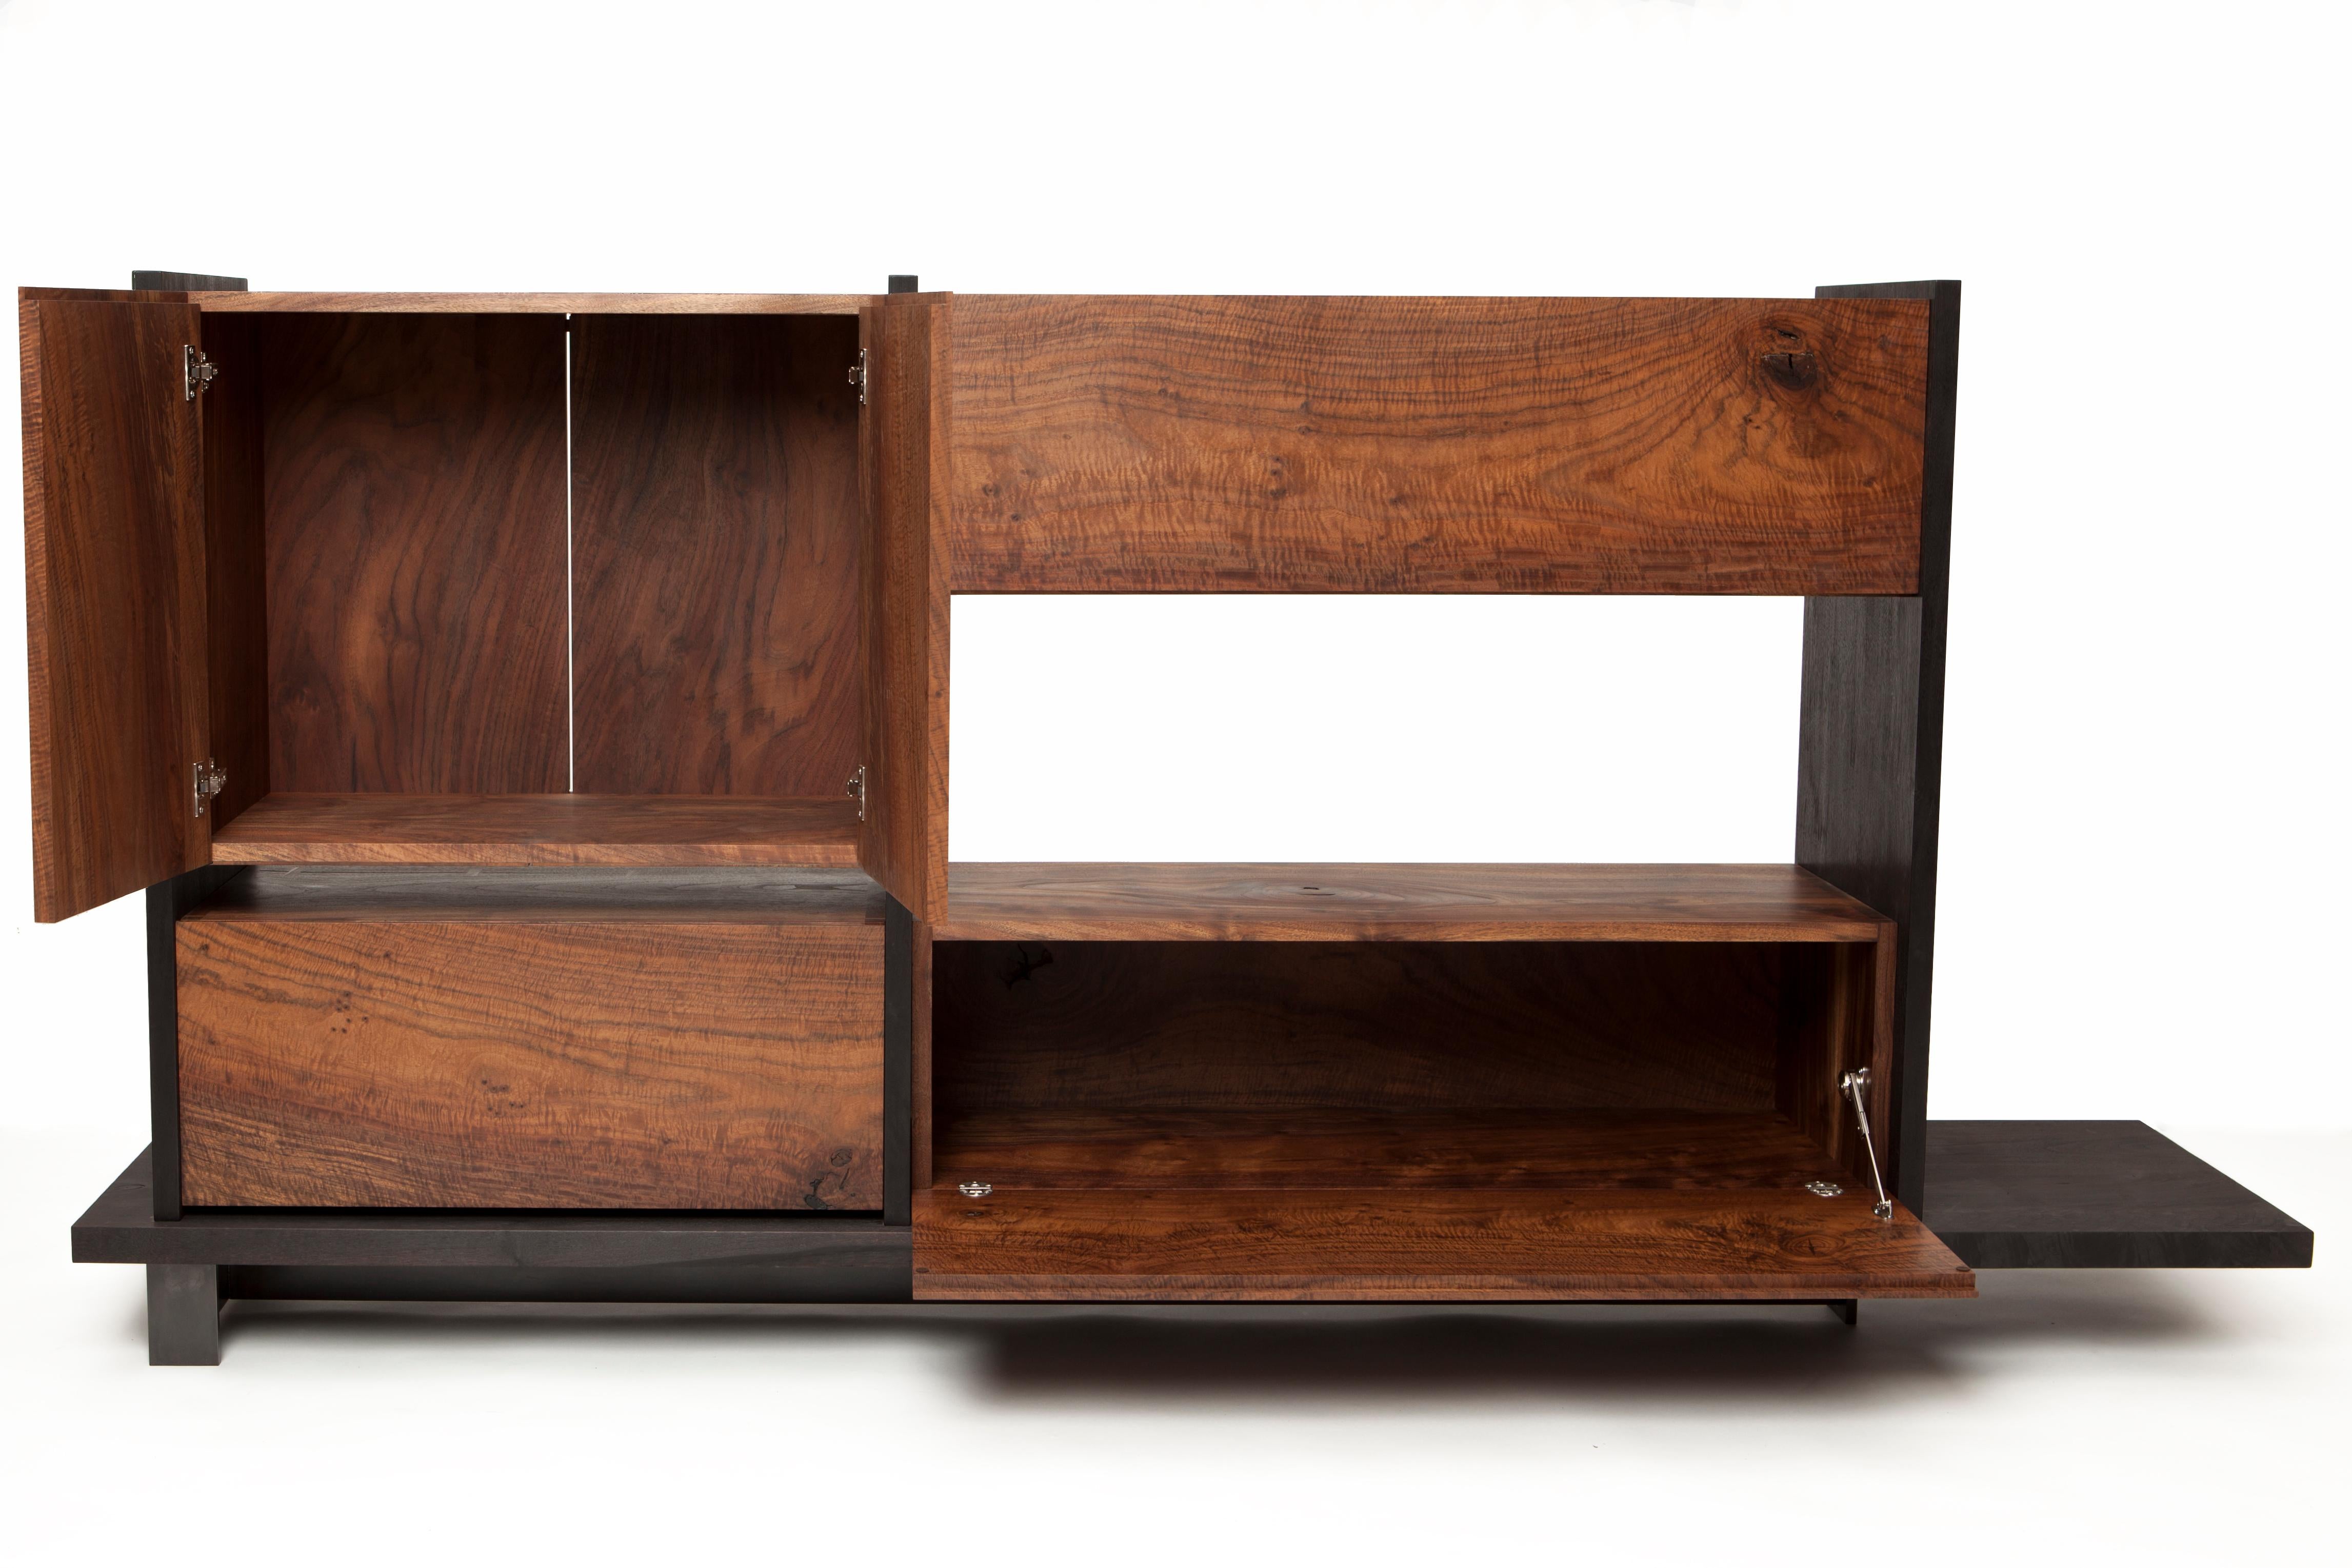 The Charro buffet cabinet by Taylor Donsker is crafted of solid, highly figured California Claro Walnut. The grain of the wood flows across each cabinet top and each cabinet face. The cases feature hand cut dovetail joinery for generations of